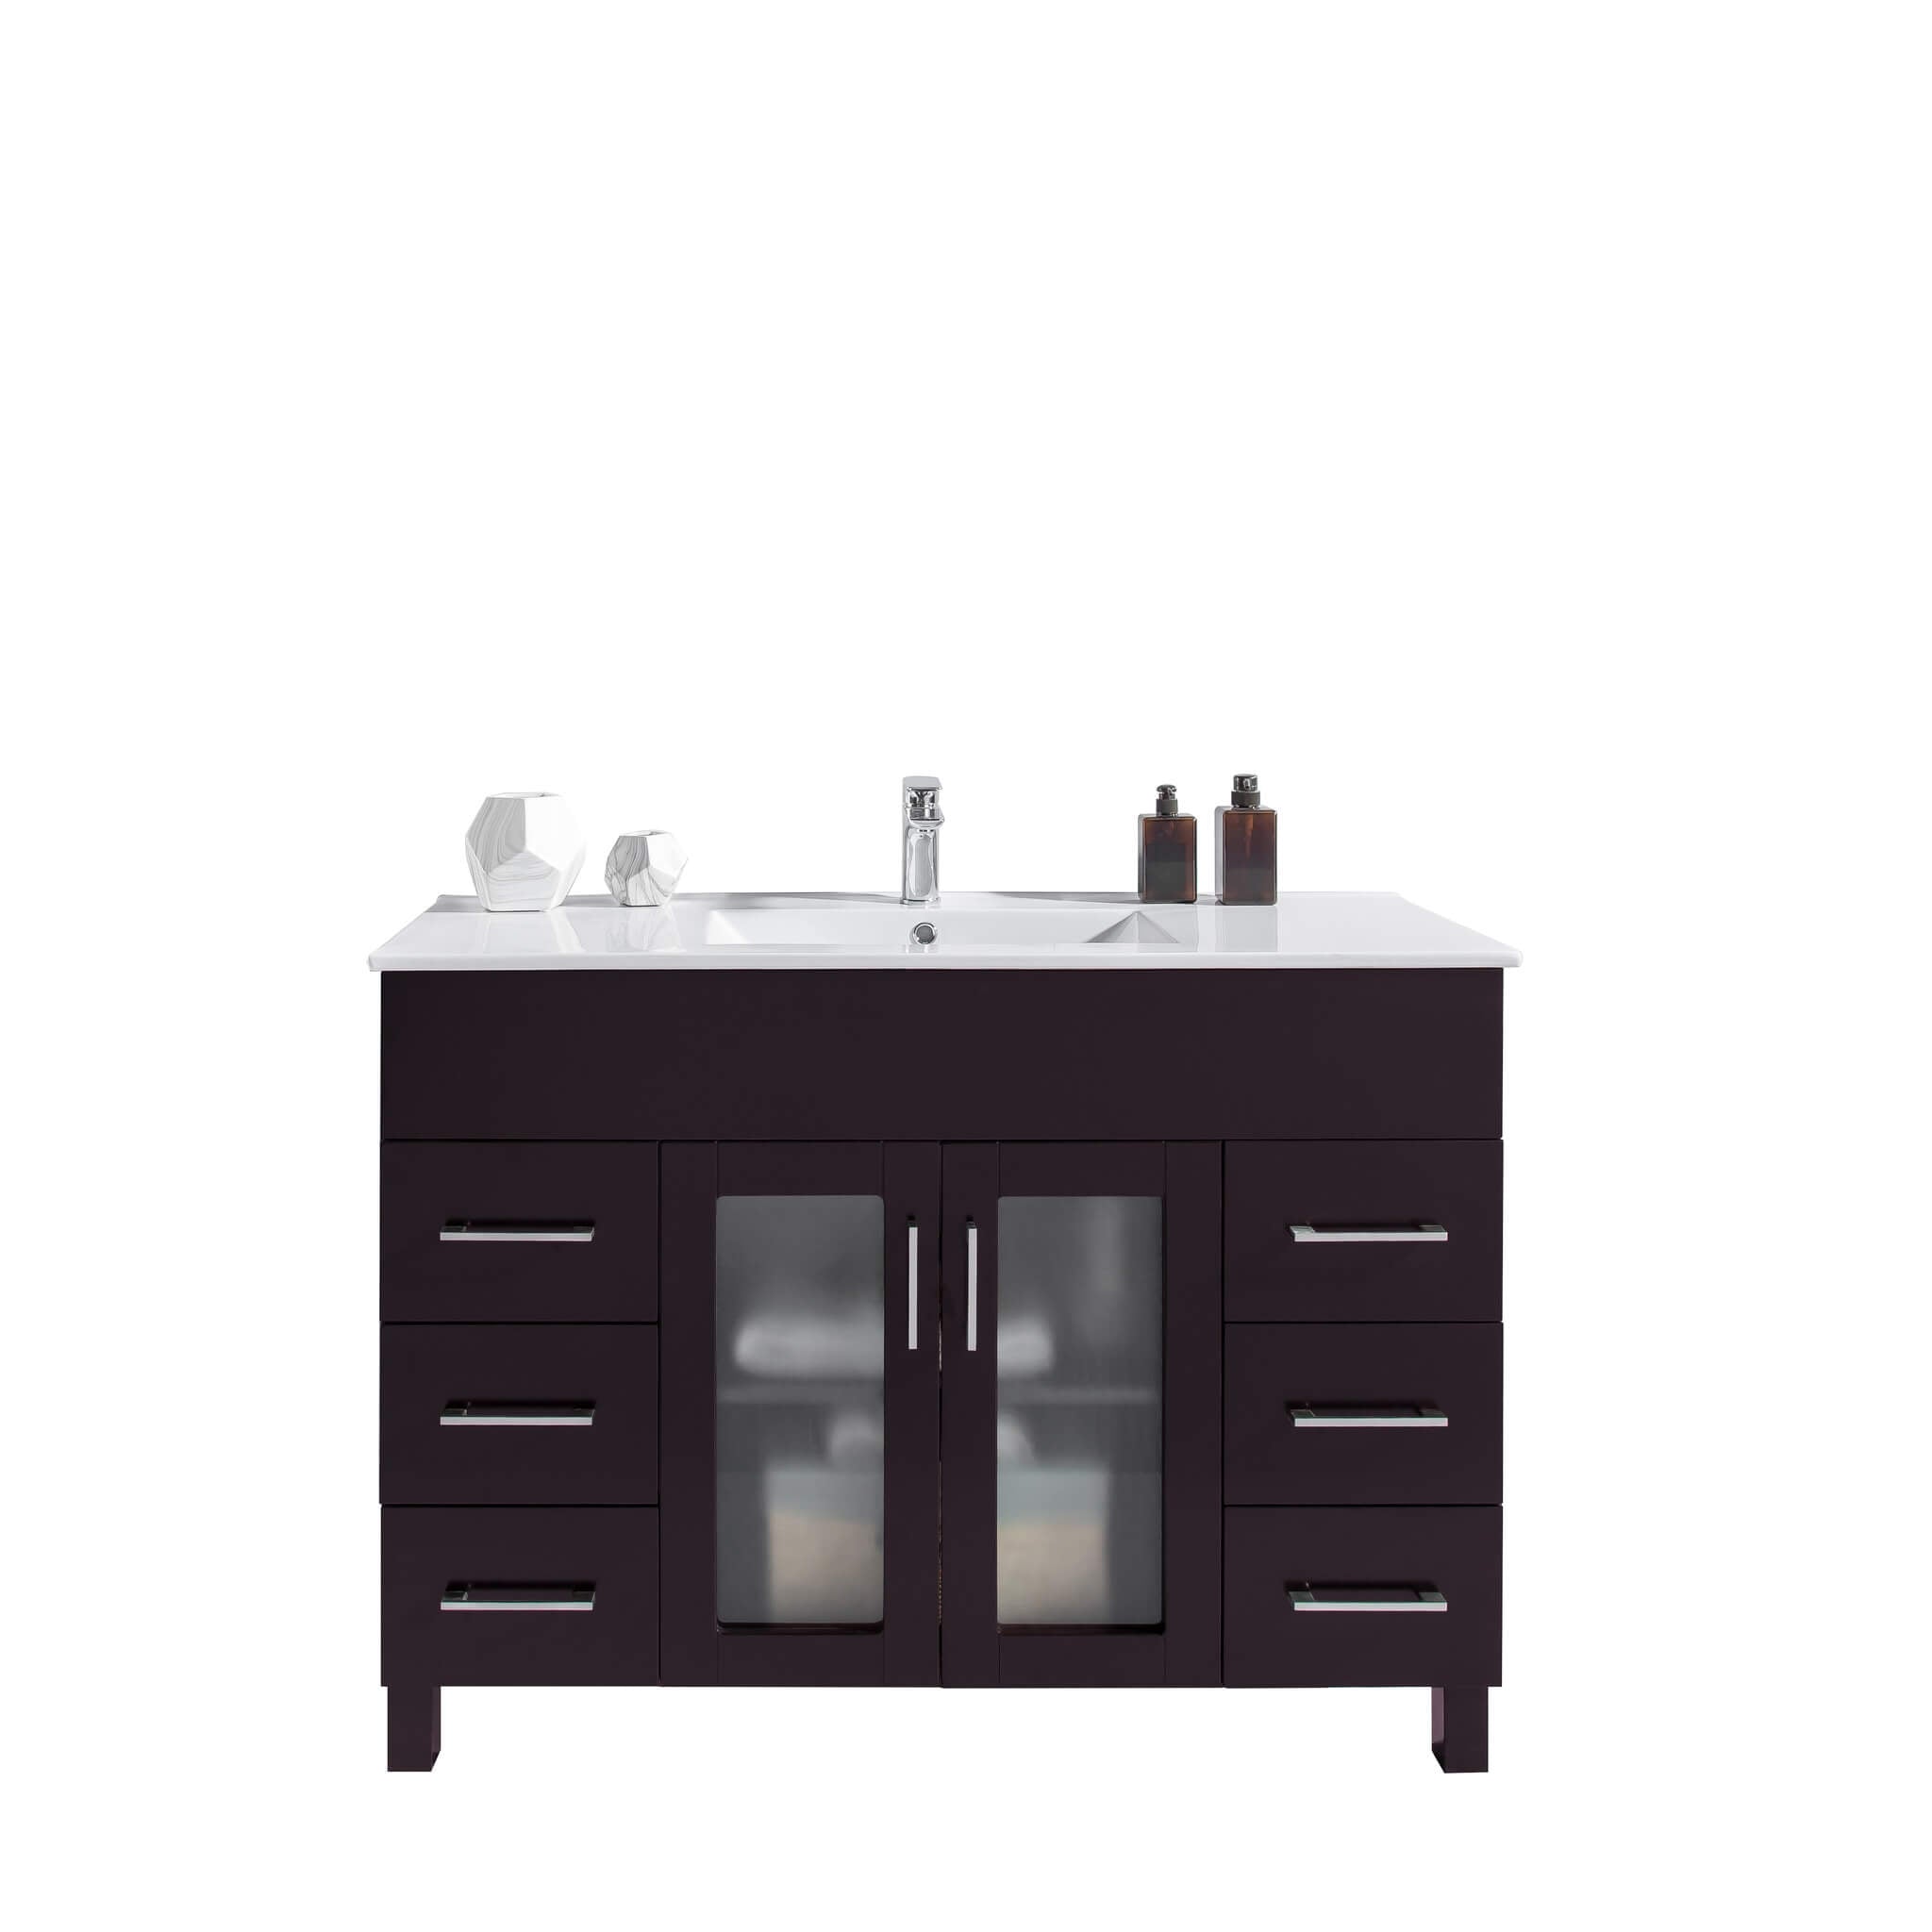 LAVIVA Nova 31321529-48B-CB 48" Single Bathroom Vanity in Brown with Ceramic Top and Integrated Sink, Front View